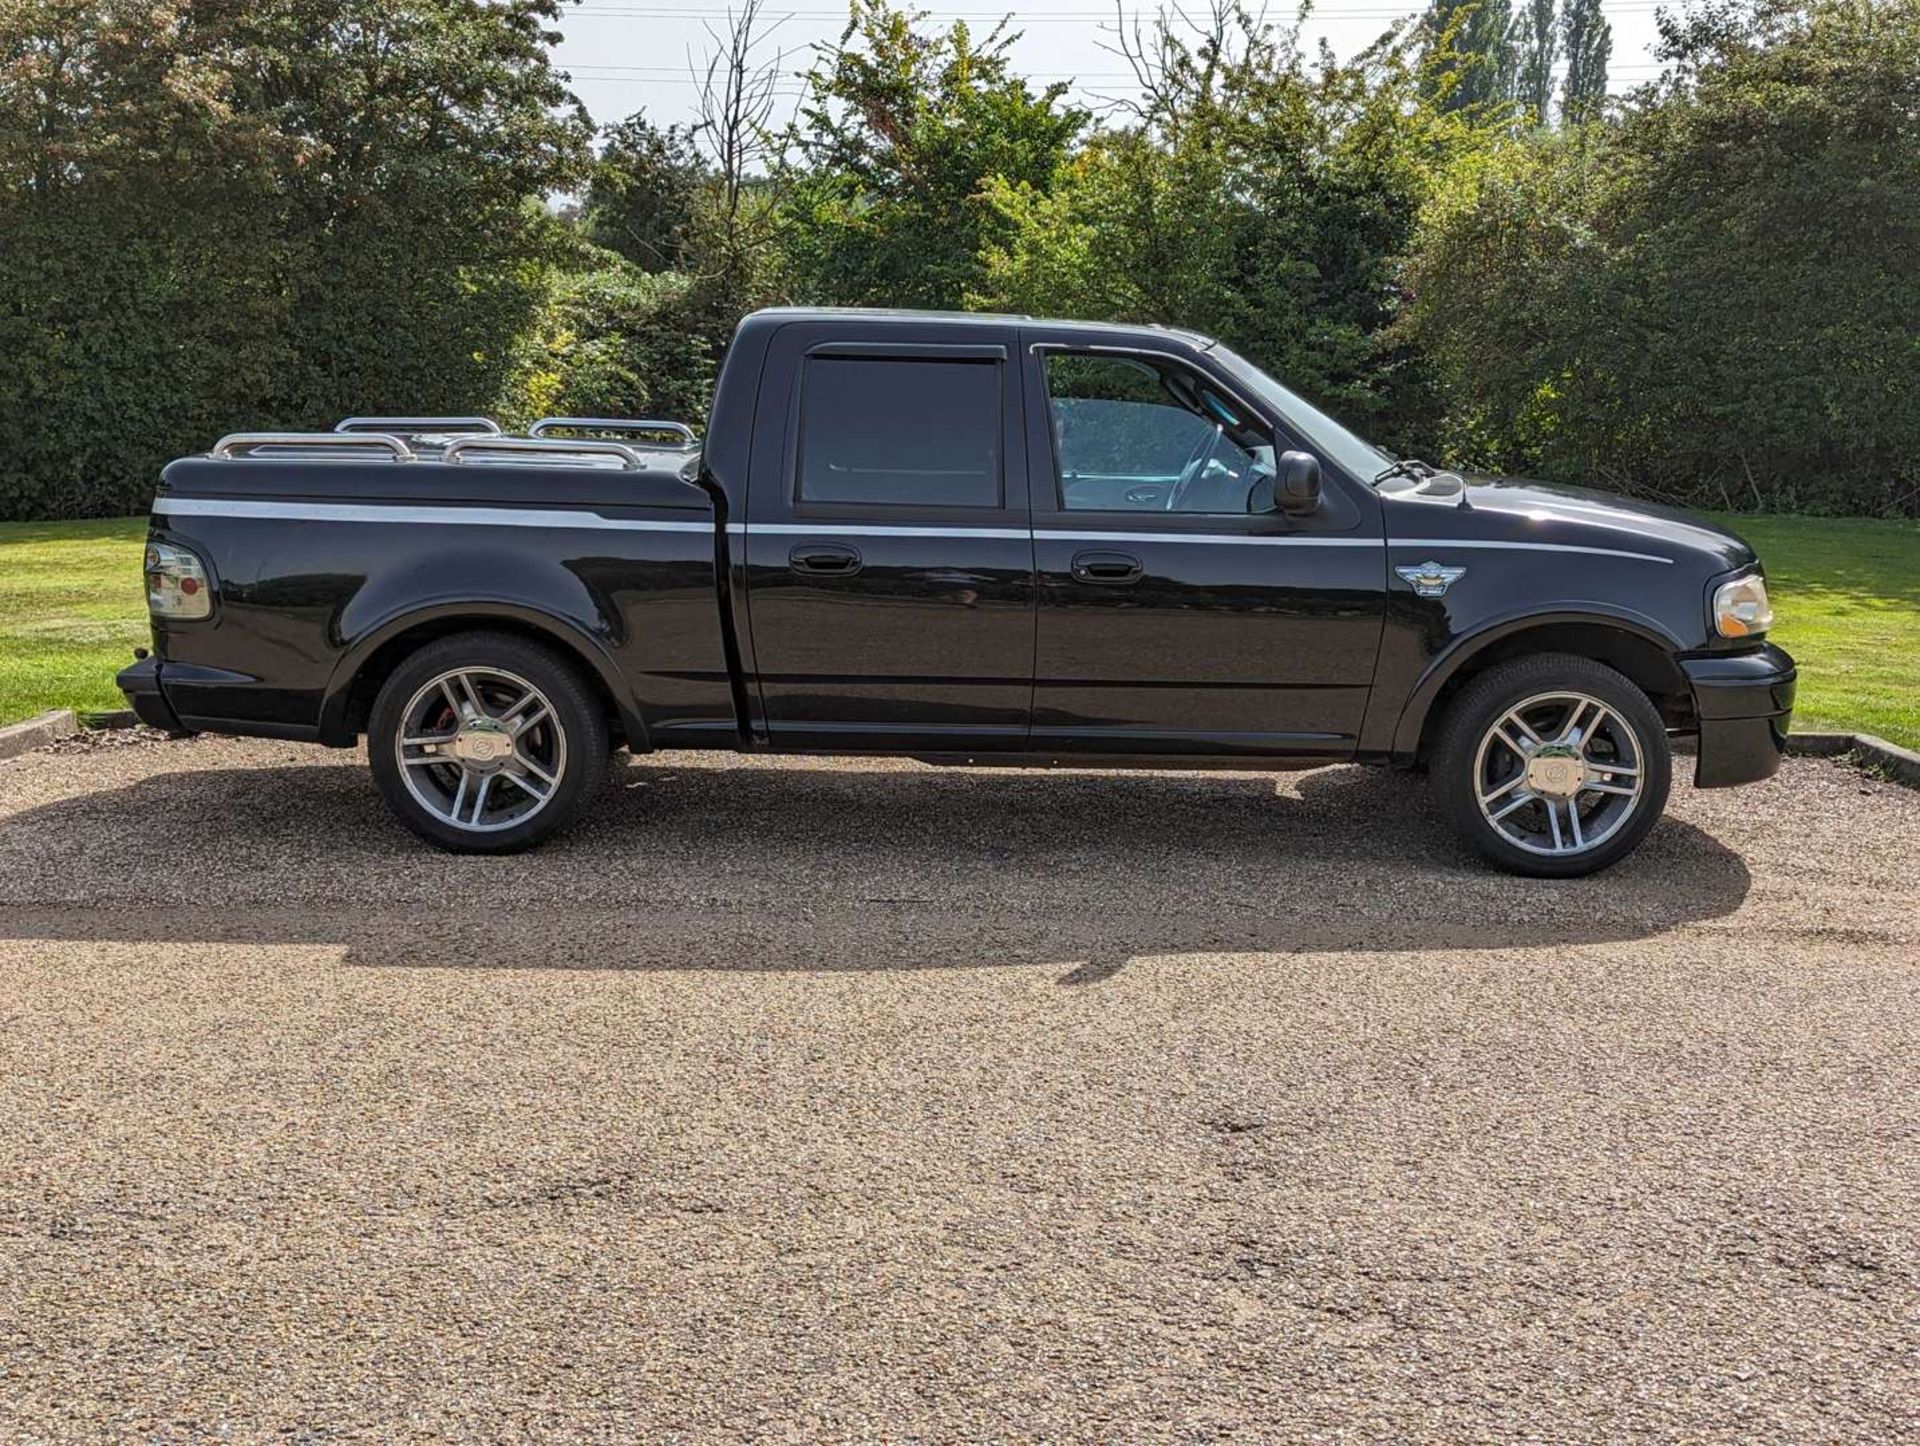 2003 FORD F150 HARLEY DAVIDSON EDITION LHD - Image 8 of 30